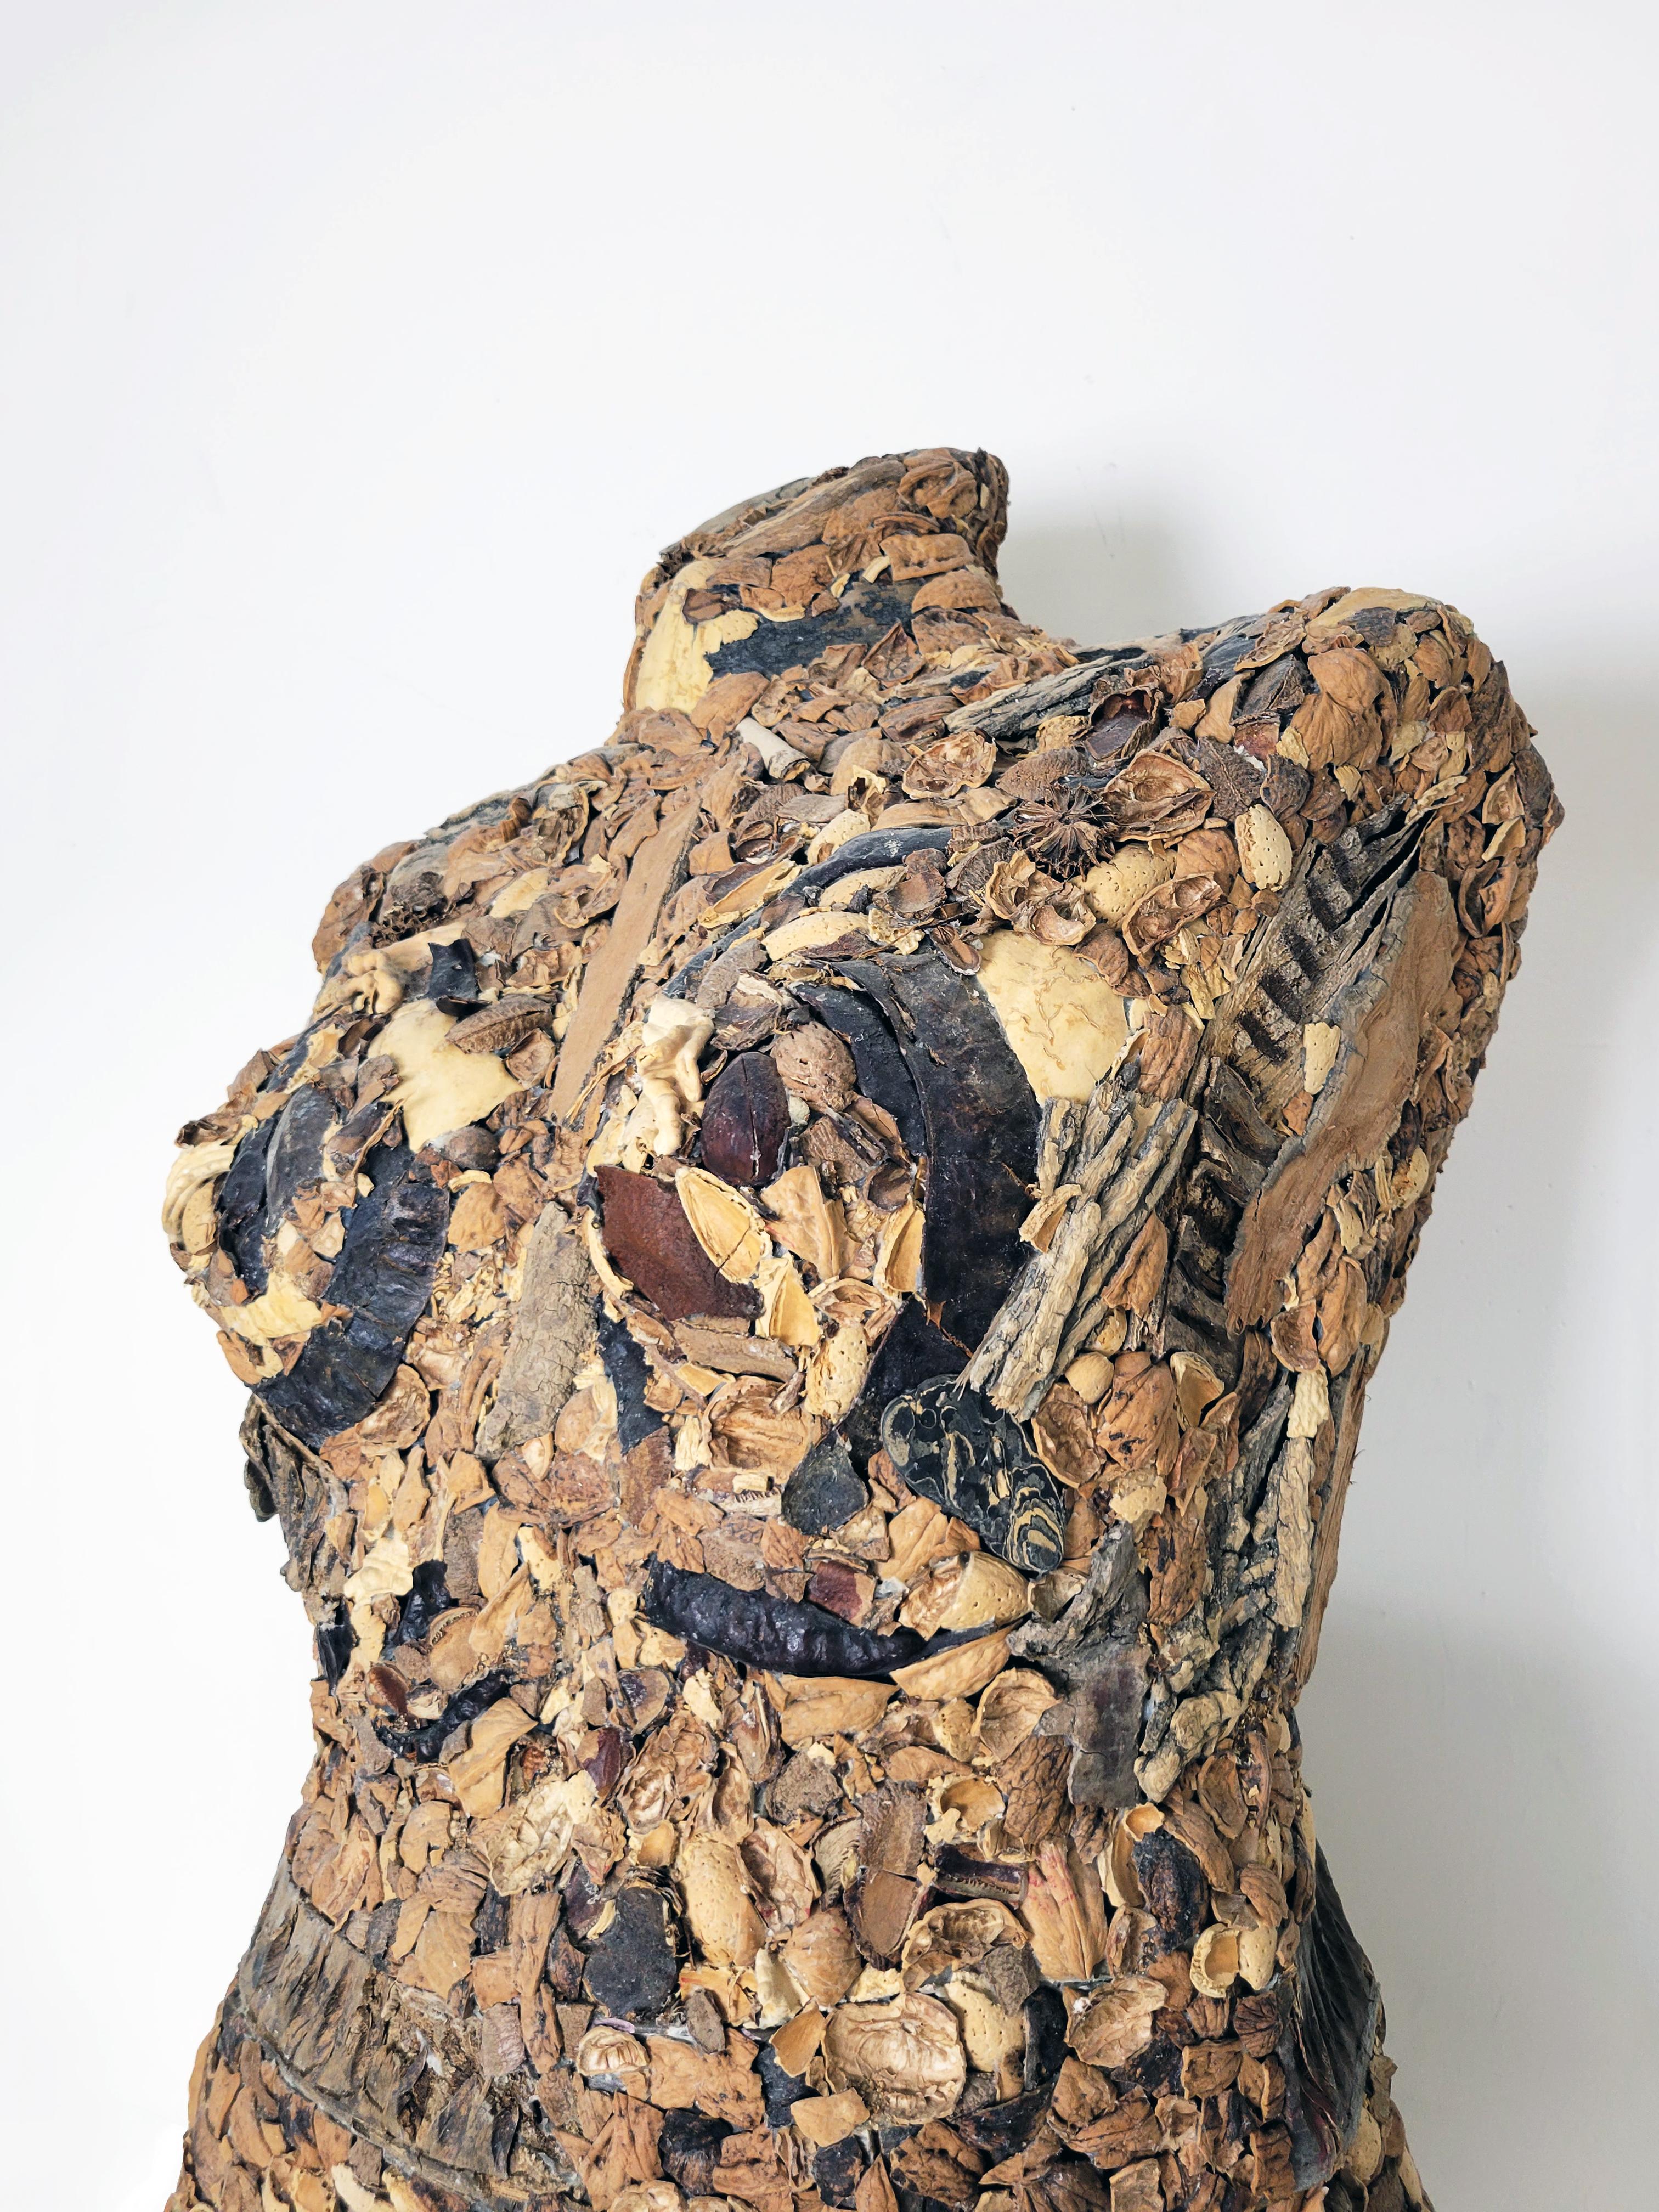 This sculpture from Linda Stein’s I am the Environment series explores the artist's relationship to the earth and addresses the interconnectedness of all living things. This sculpture is made from found nut shells in pleasing earth tones.

Stein's